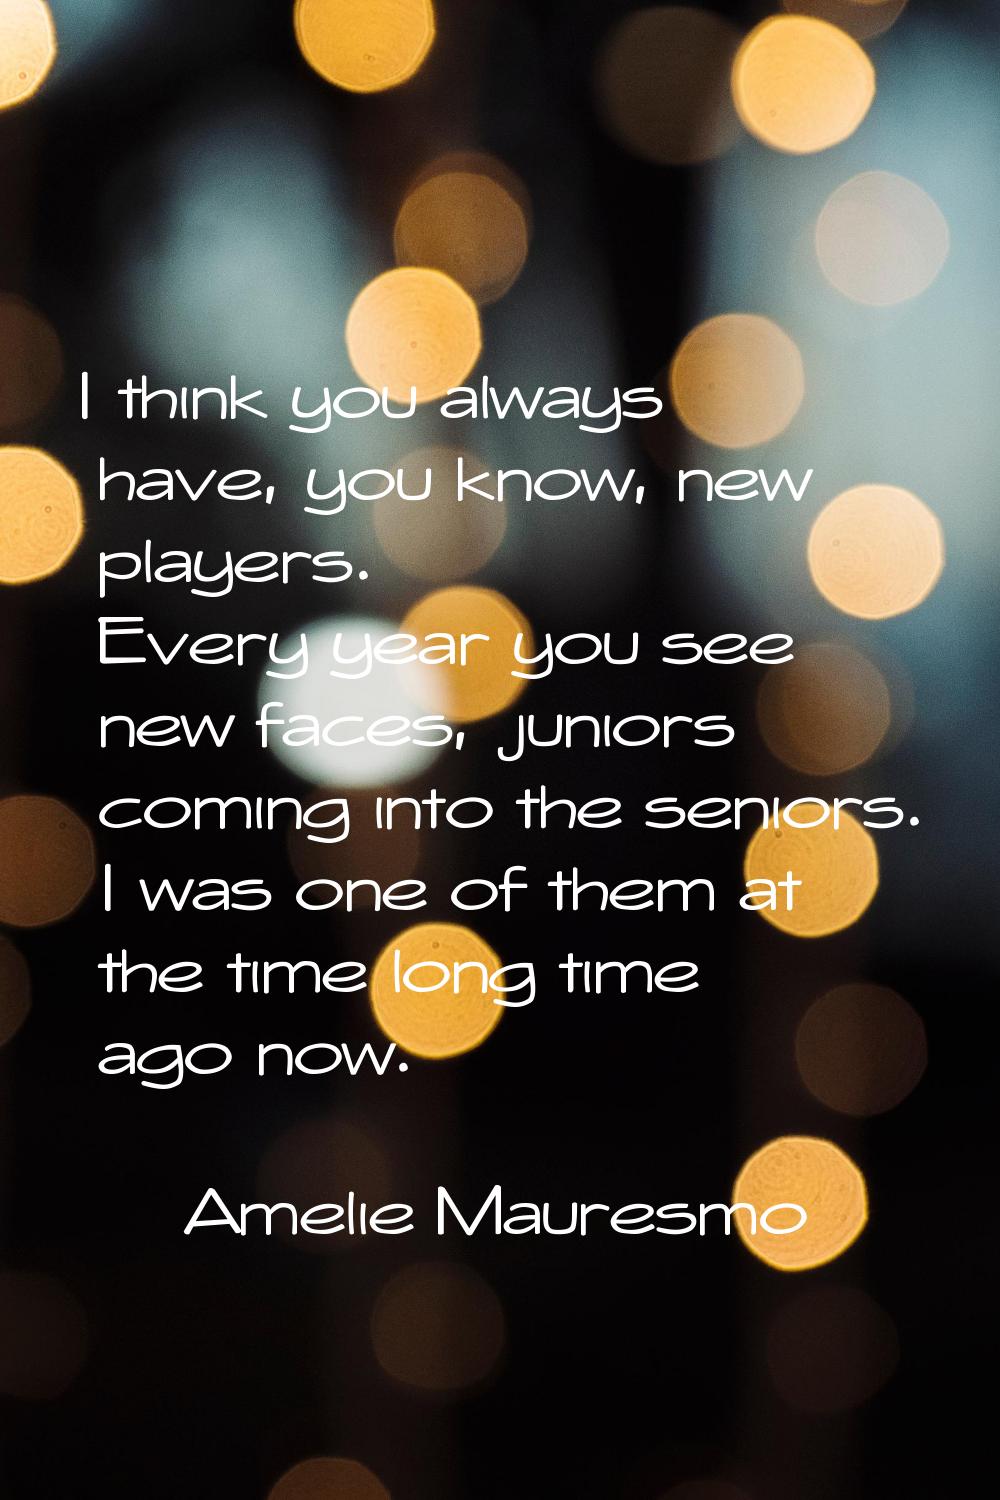 I think you always have, you know, new players. Every year you see new faces, juniors coming into t